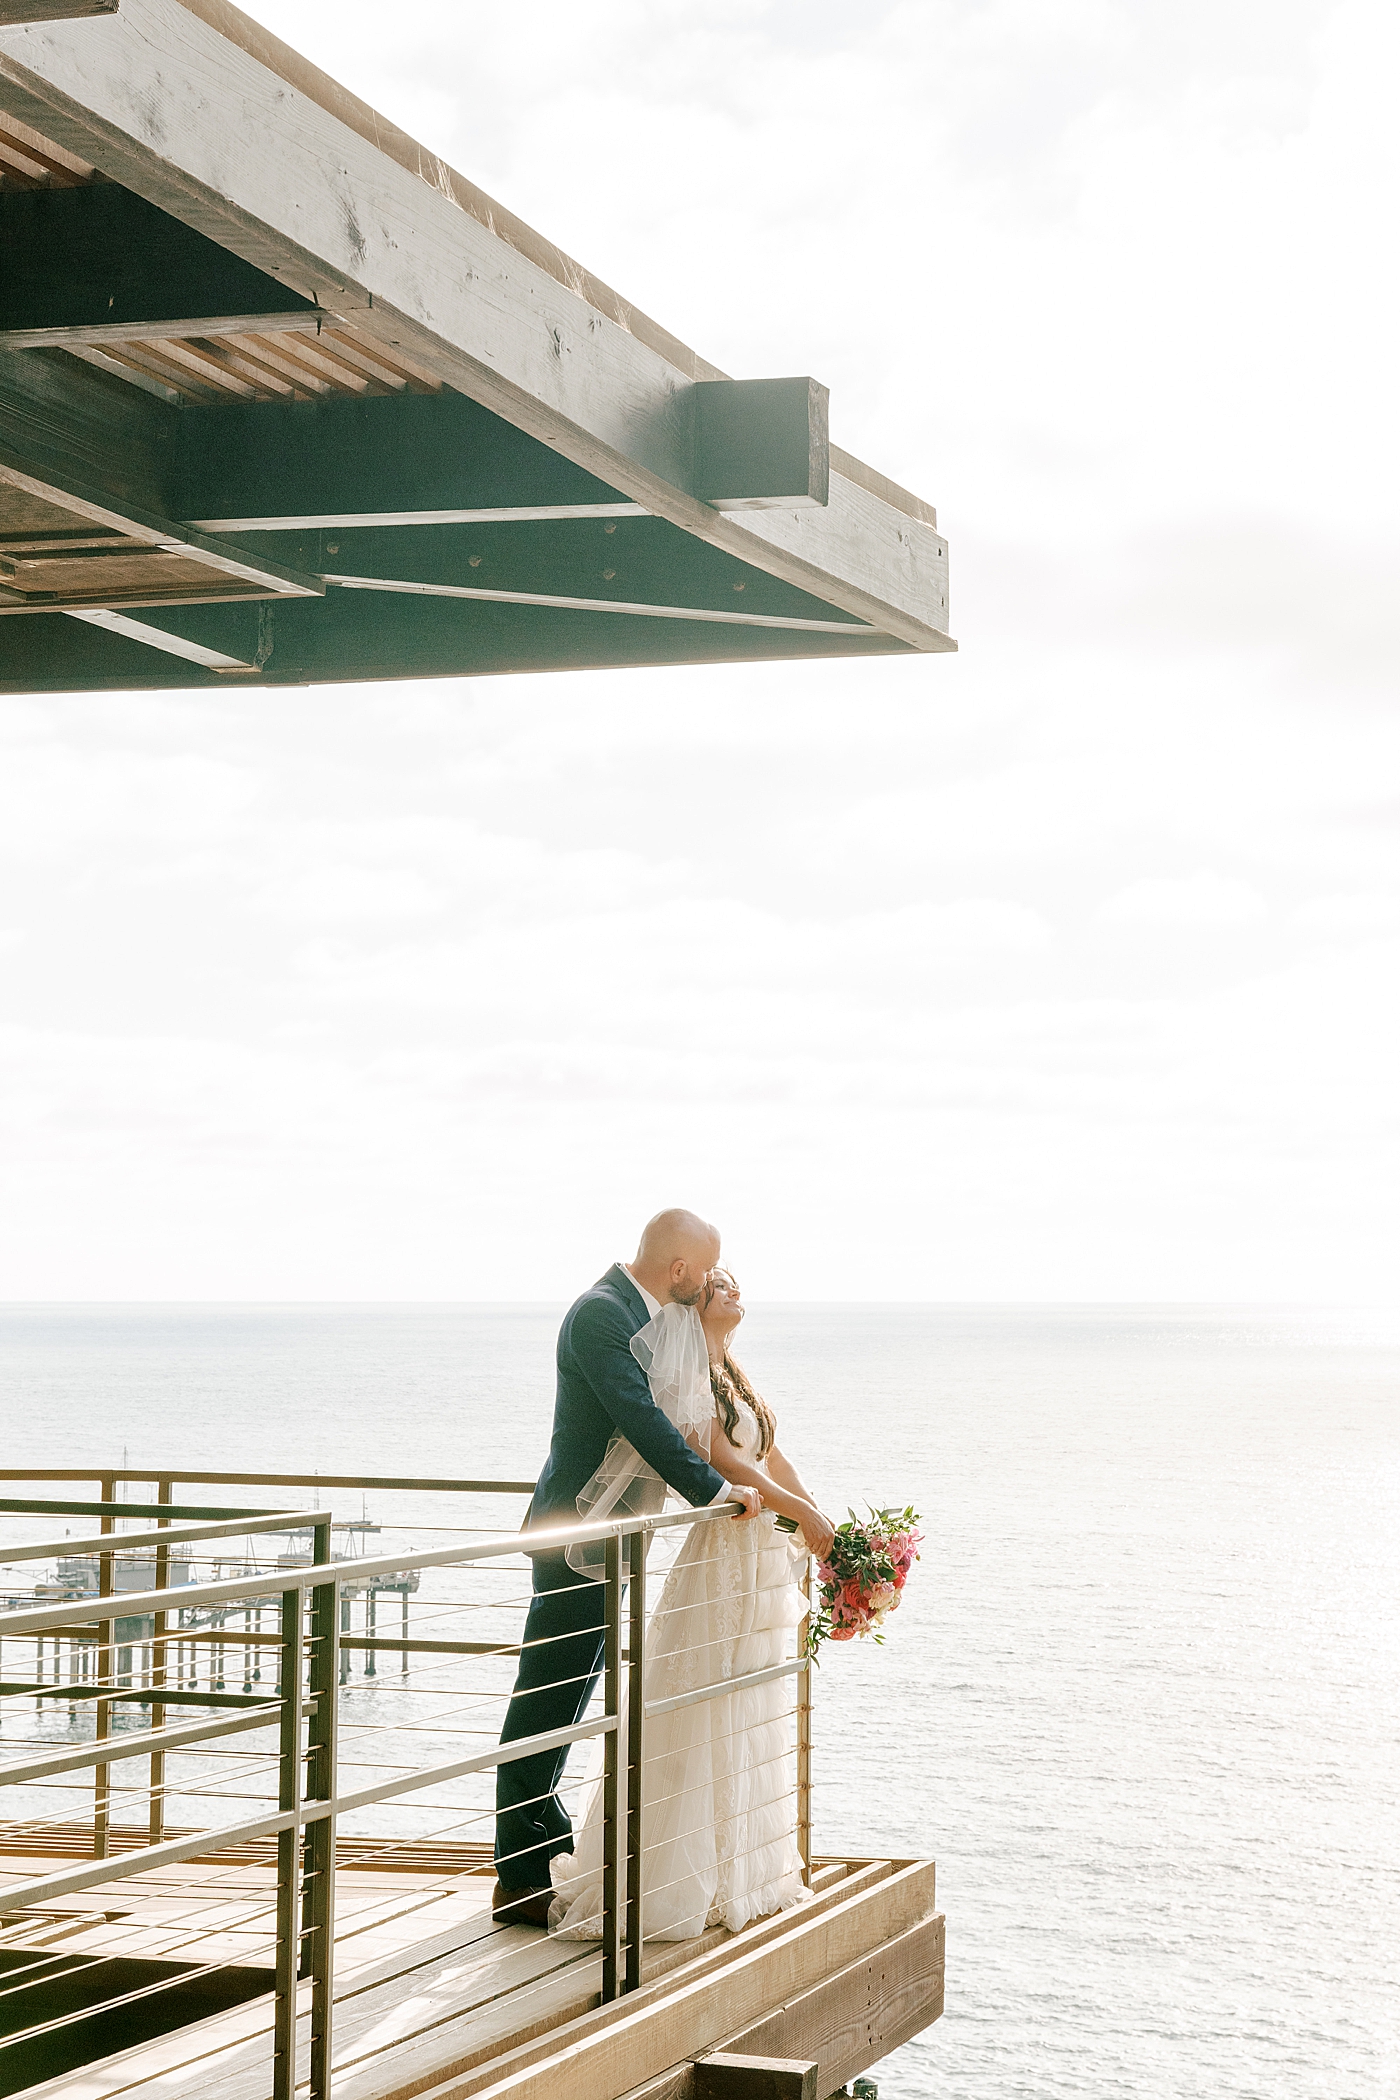 Couple on a balcony overlooking the ocean | Image by Hope Helmuth Photography